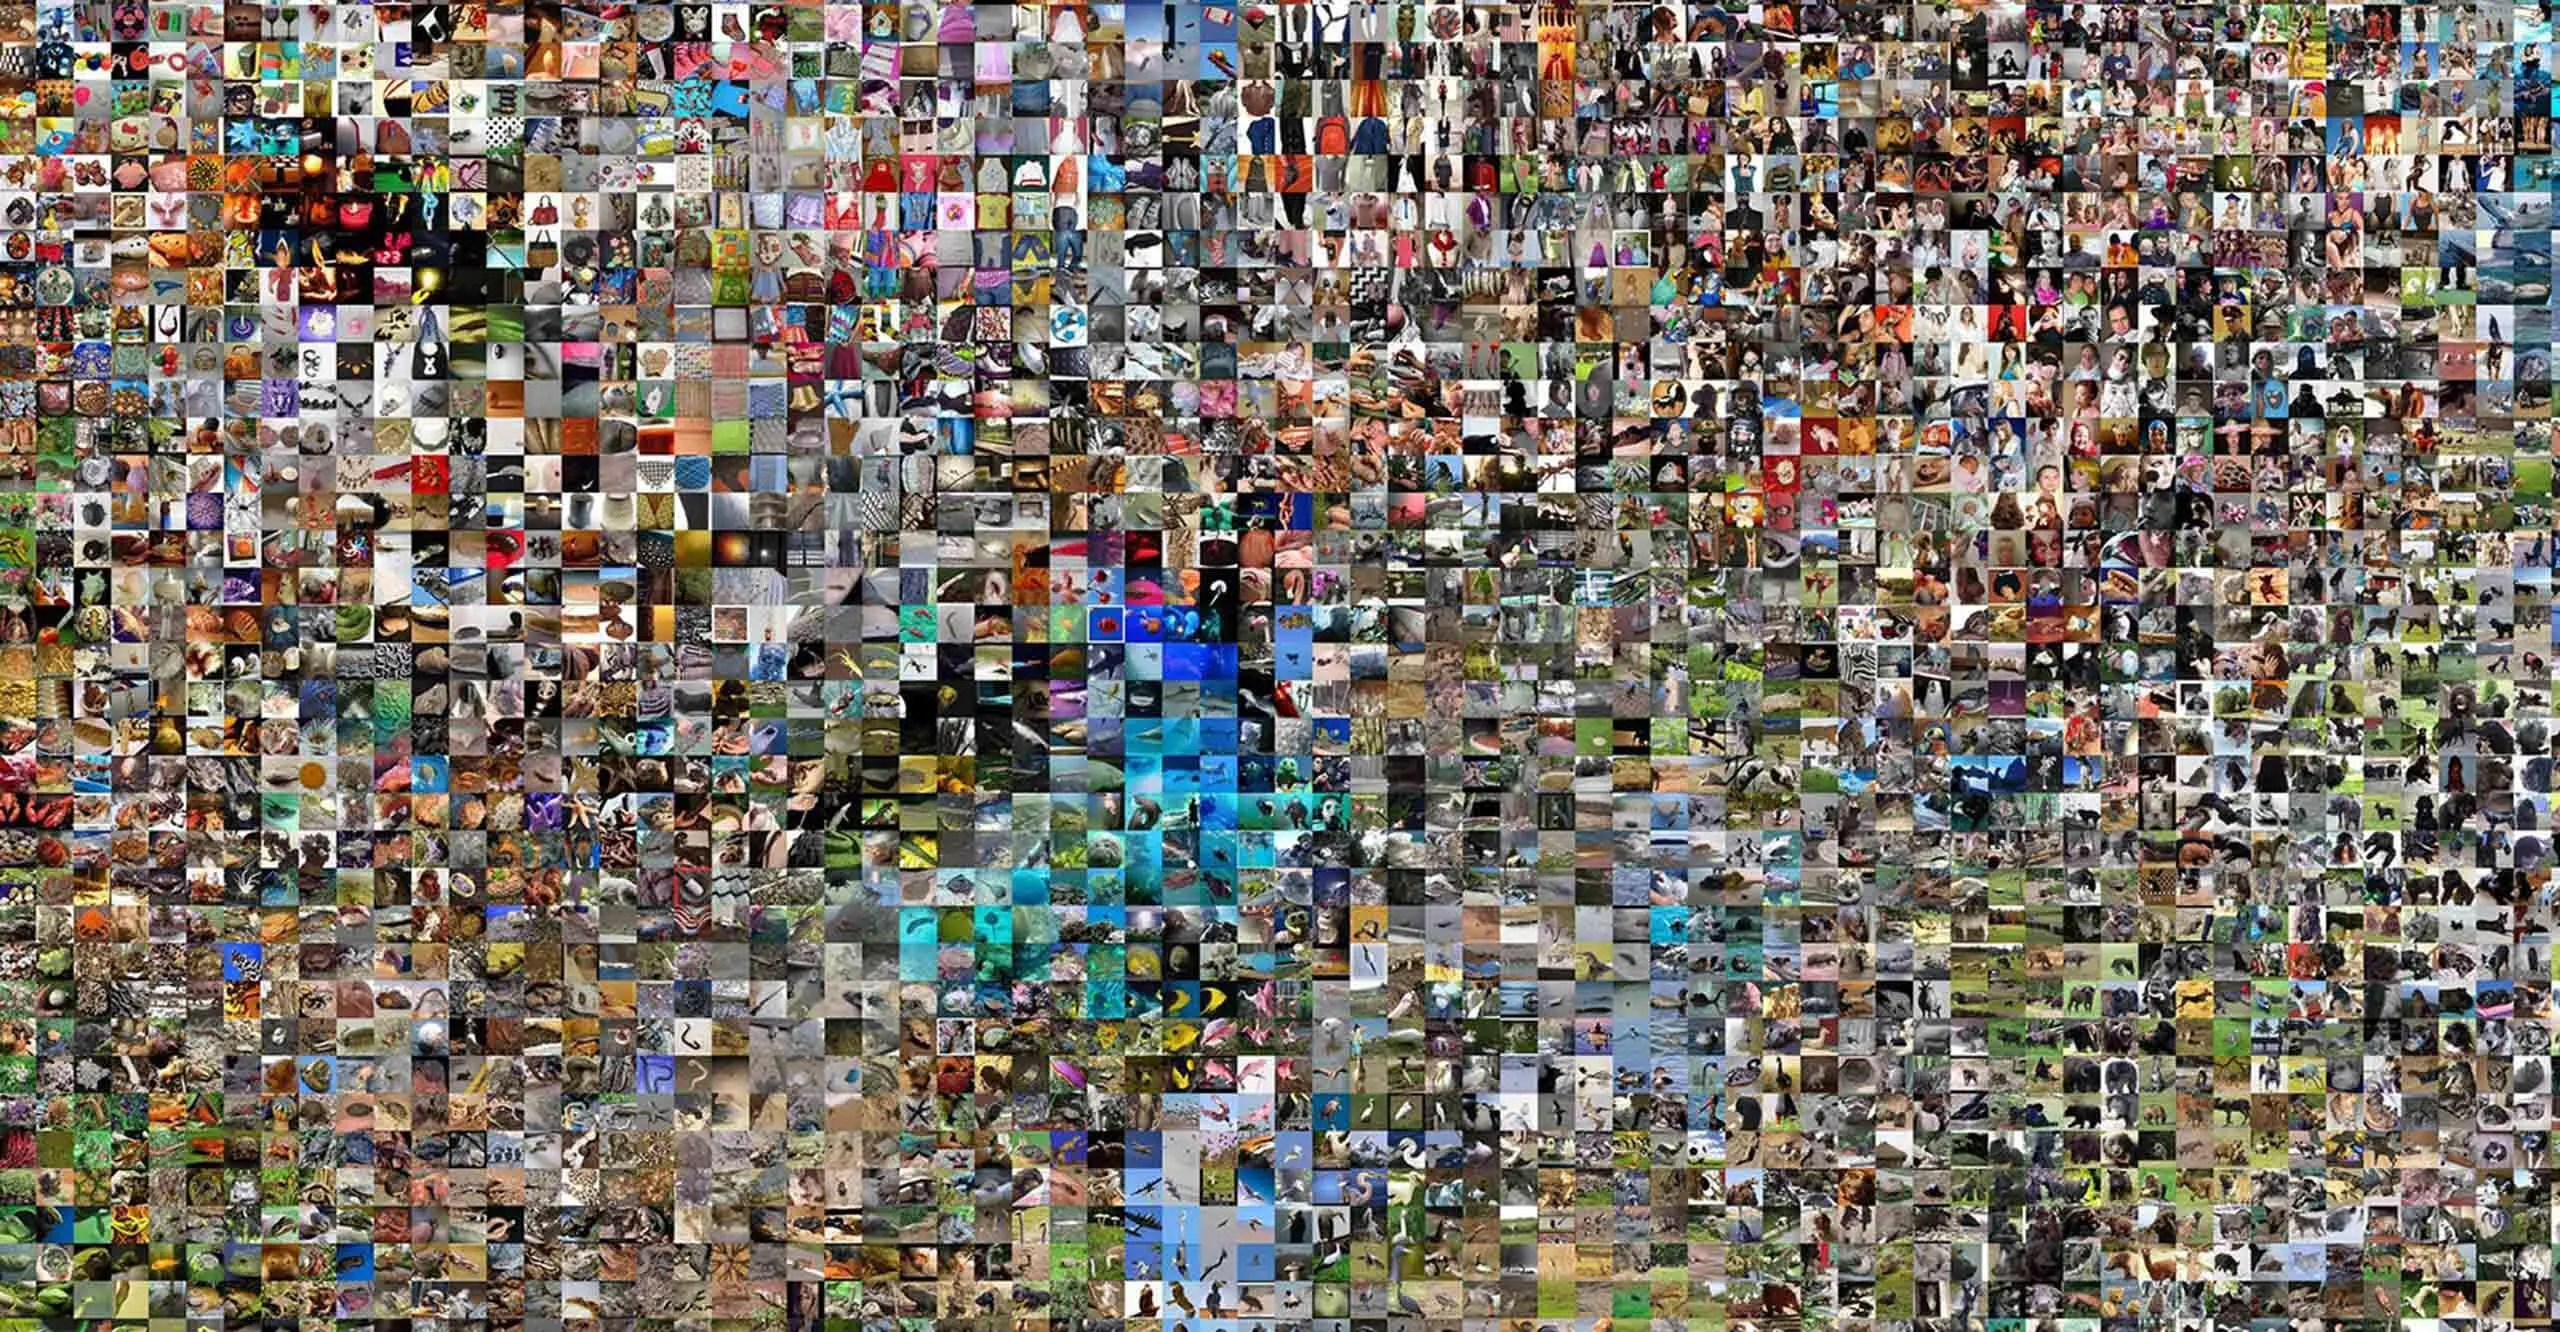 A massive grid of images as part of an image data set